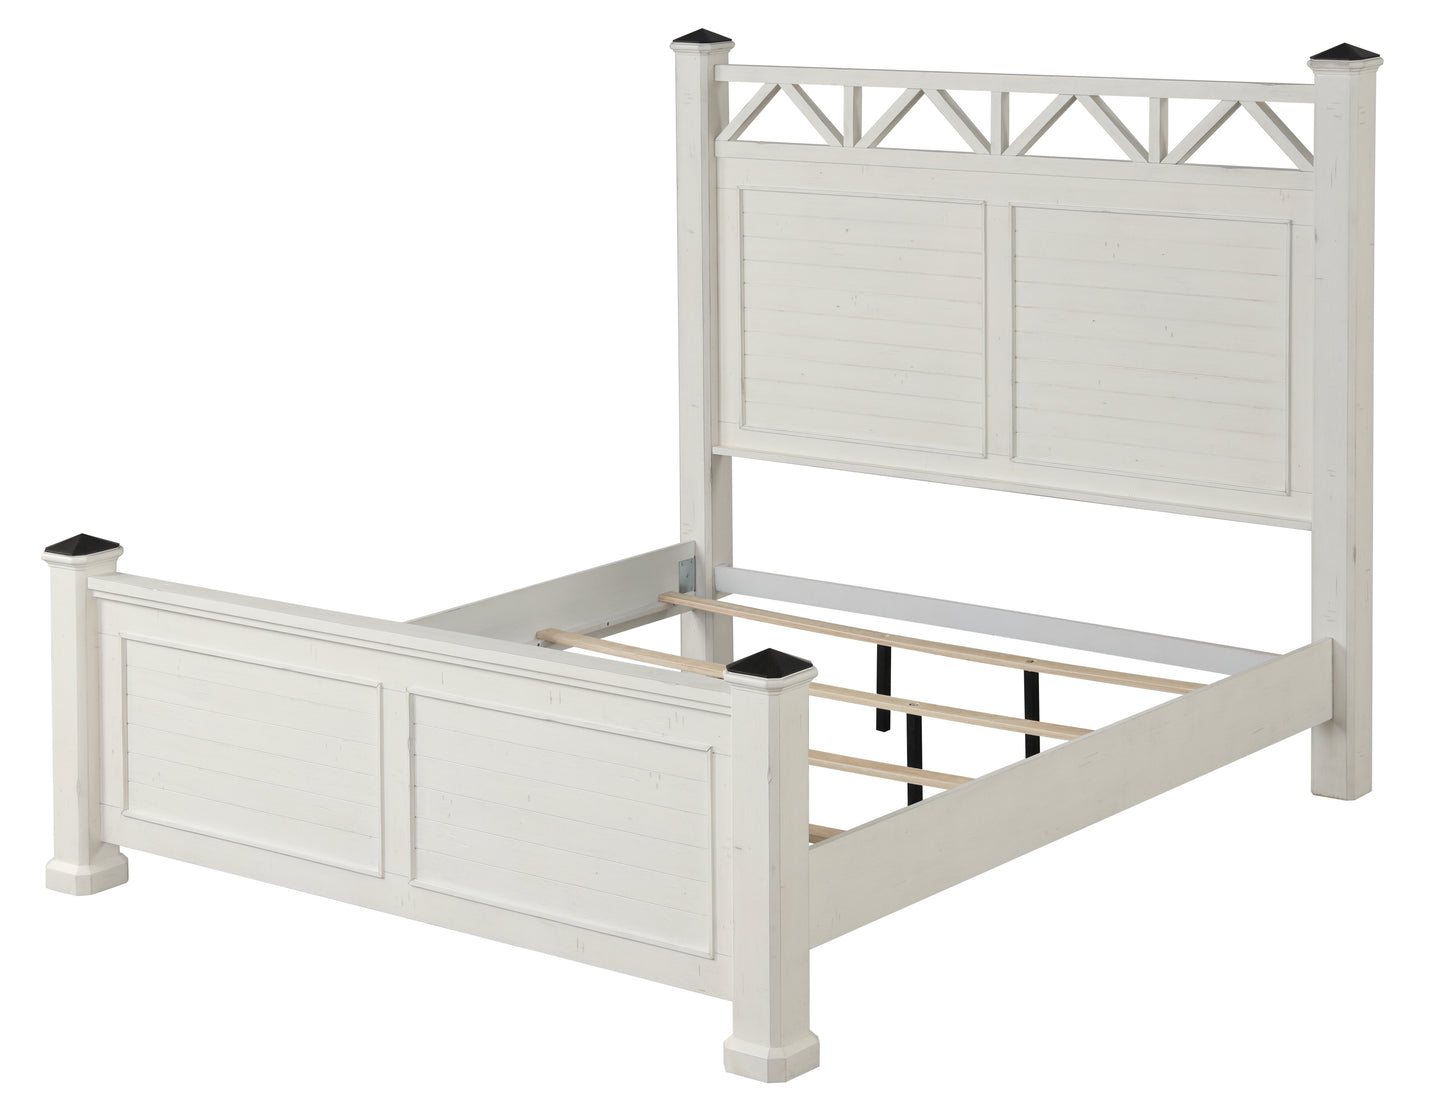 Laria Antique White Finish Wood Bedroom Collection